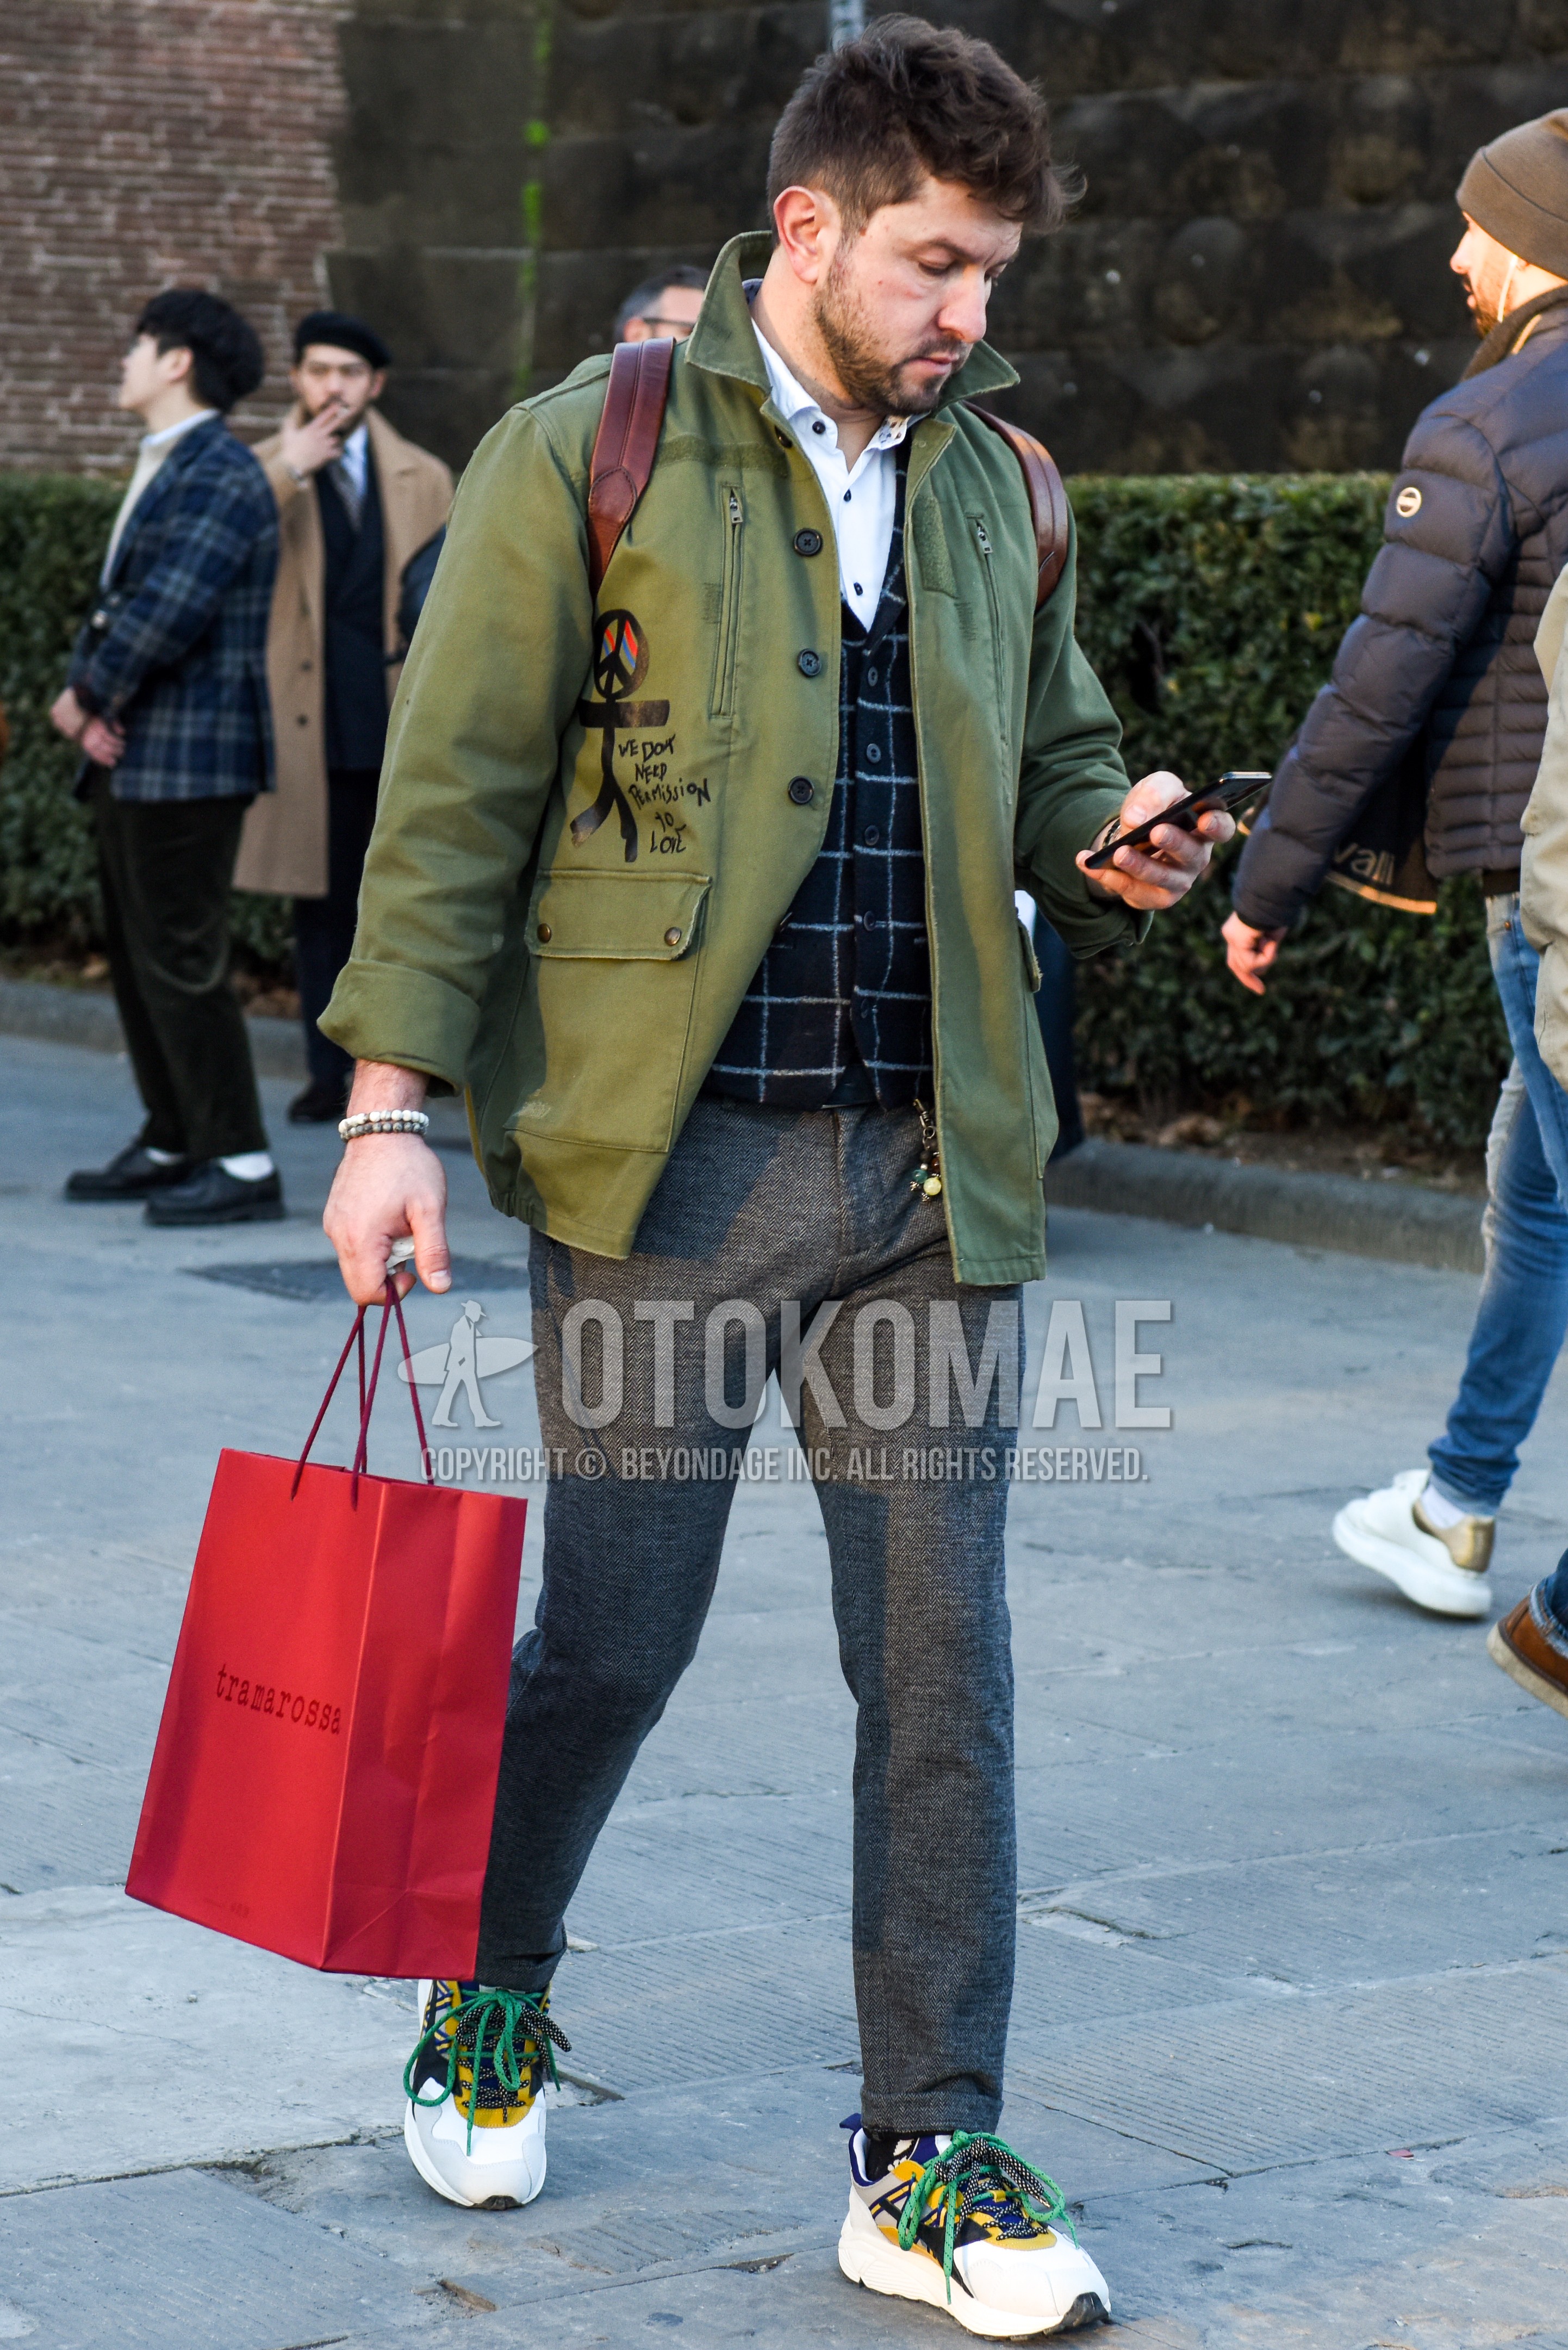 Men's autumn winter outfit with olive green graphic field jacket/hunting jacket, navy check gilet, white plain shirt, gray plain slacks, white low-cut sneakers.